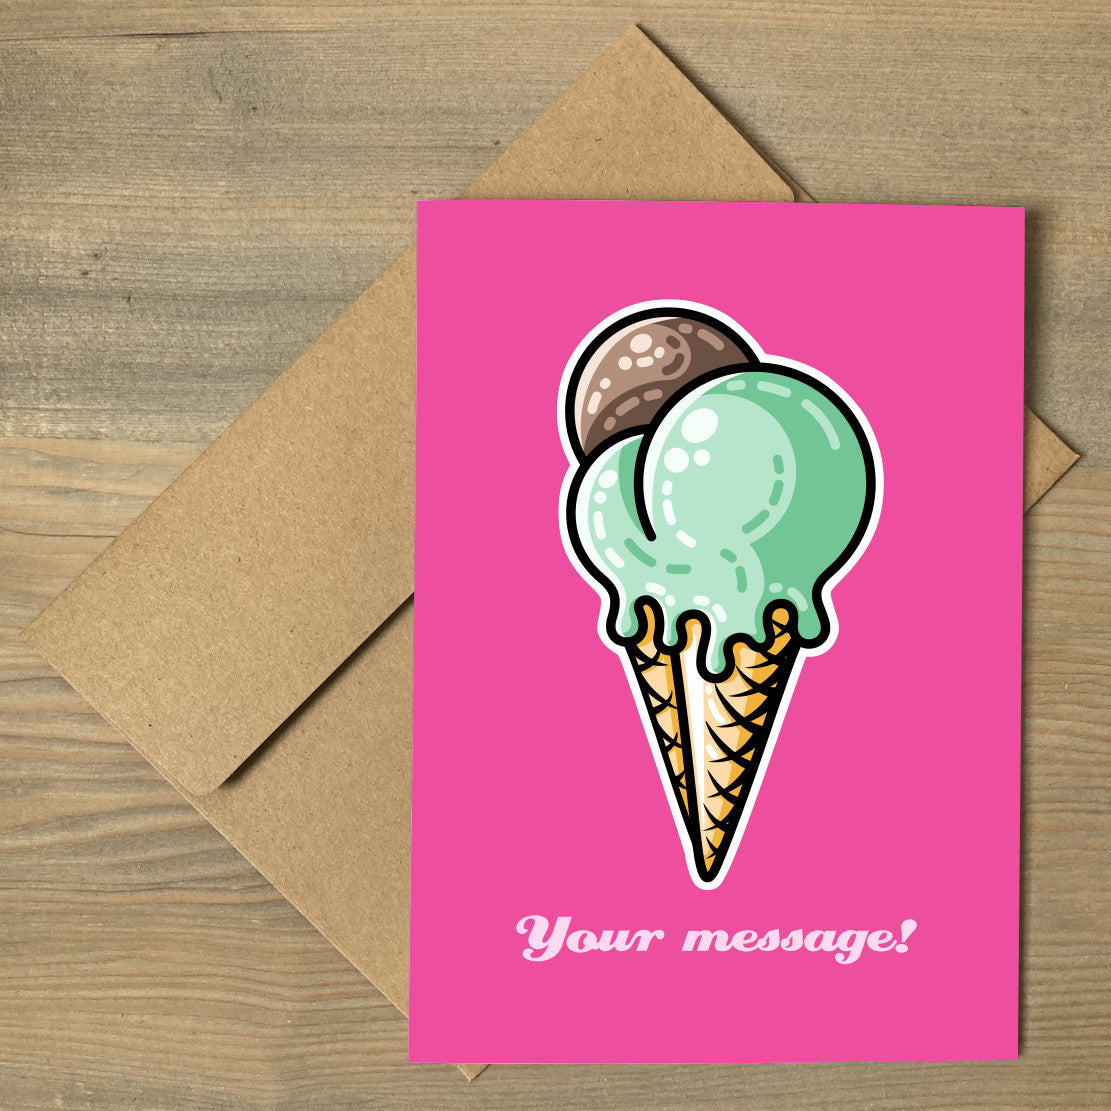 A pink greeting card lying flat on a brown envelope, with a design of a cone with three scoops of ice cream, two green and one brown, and a personalised message below